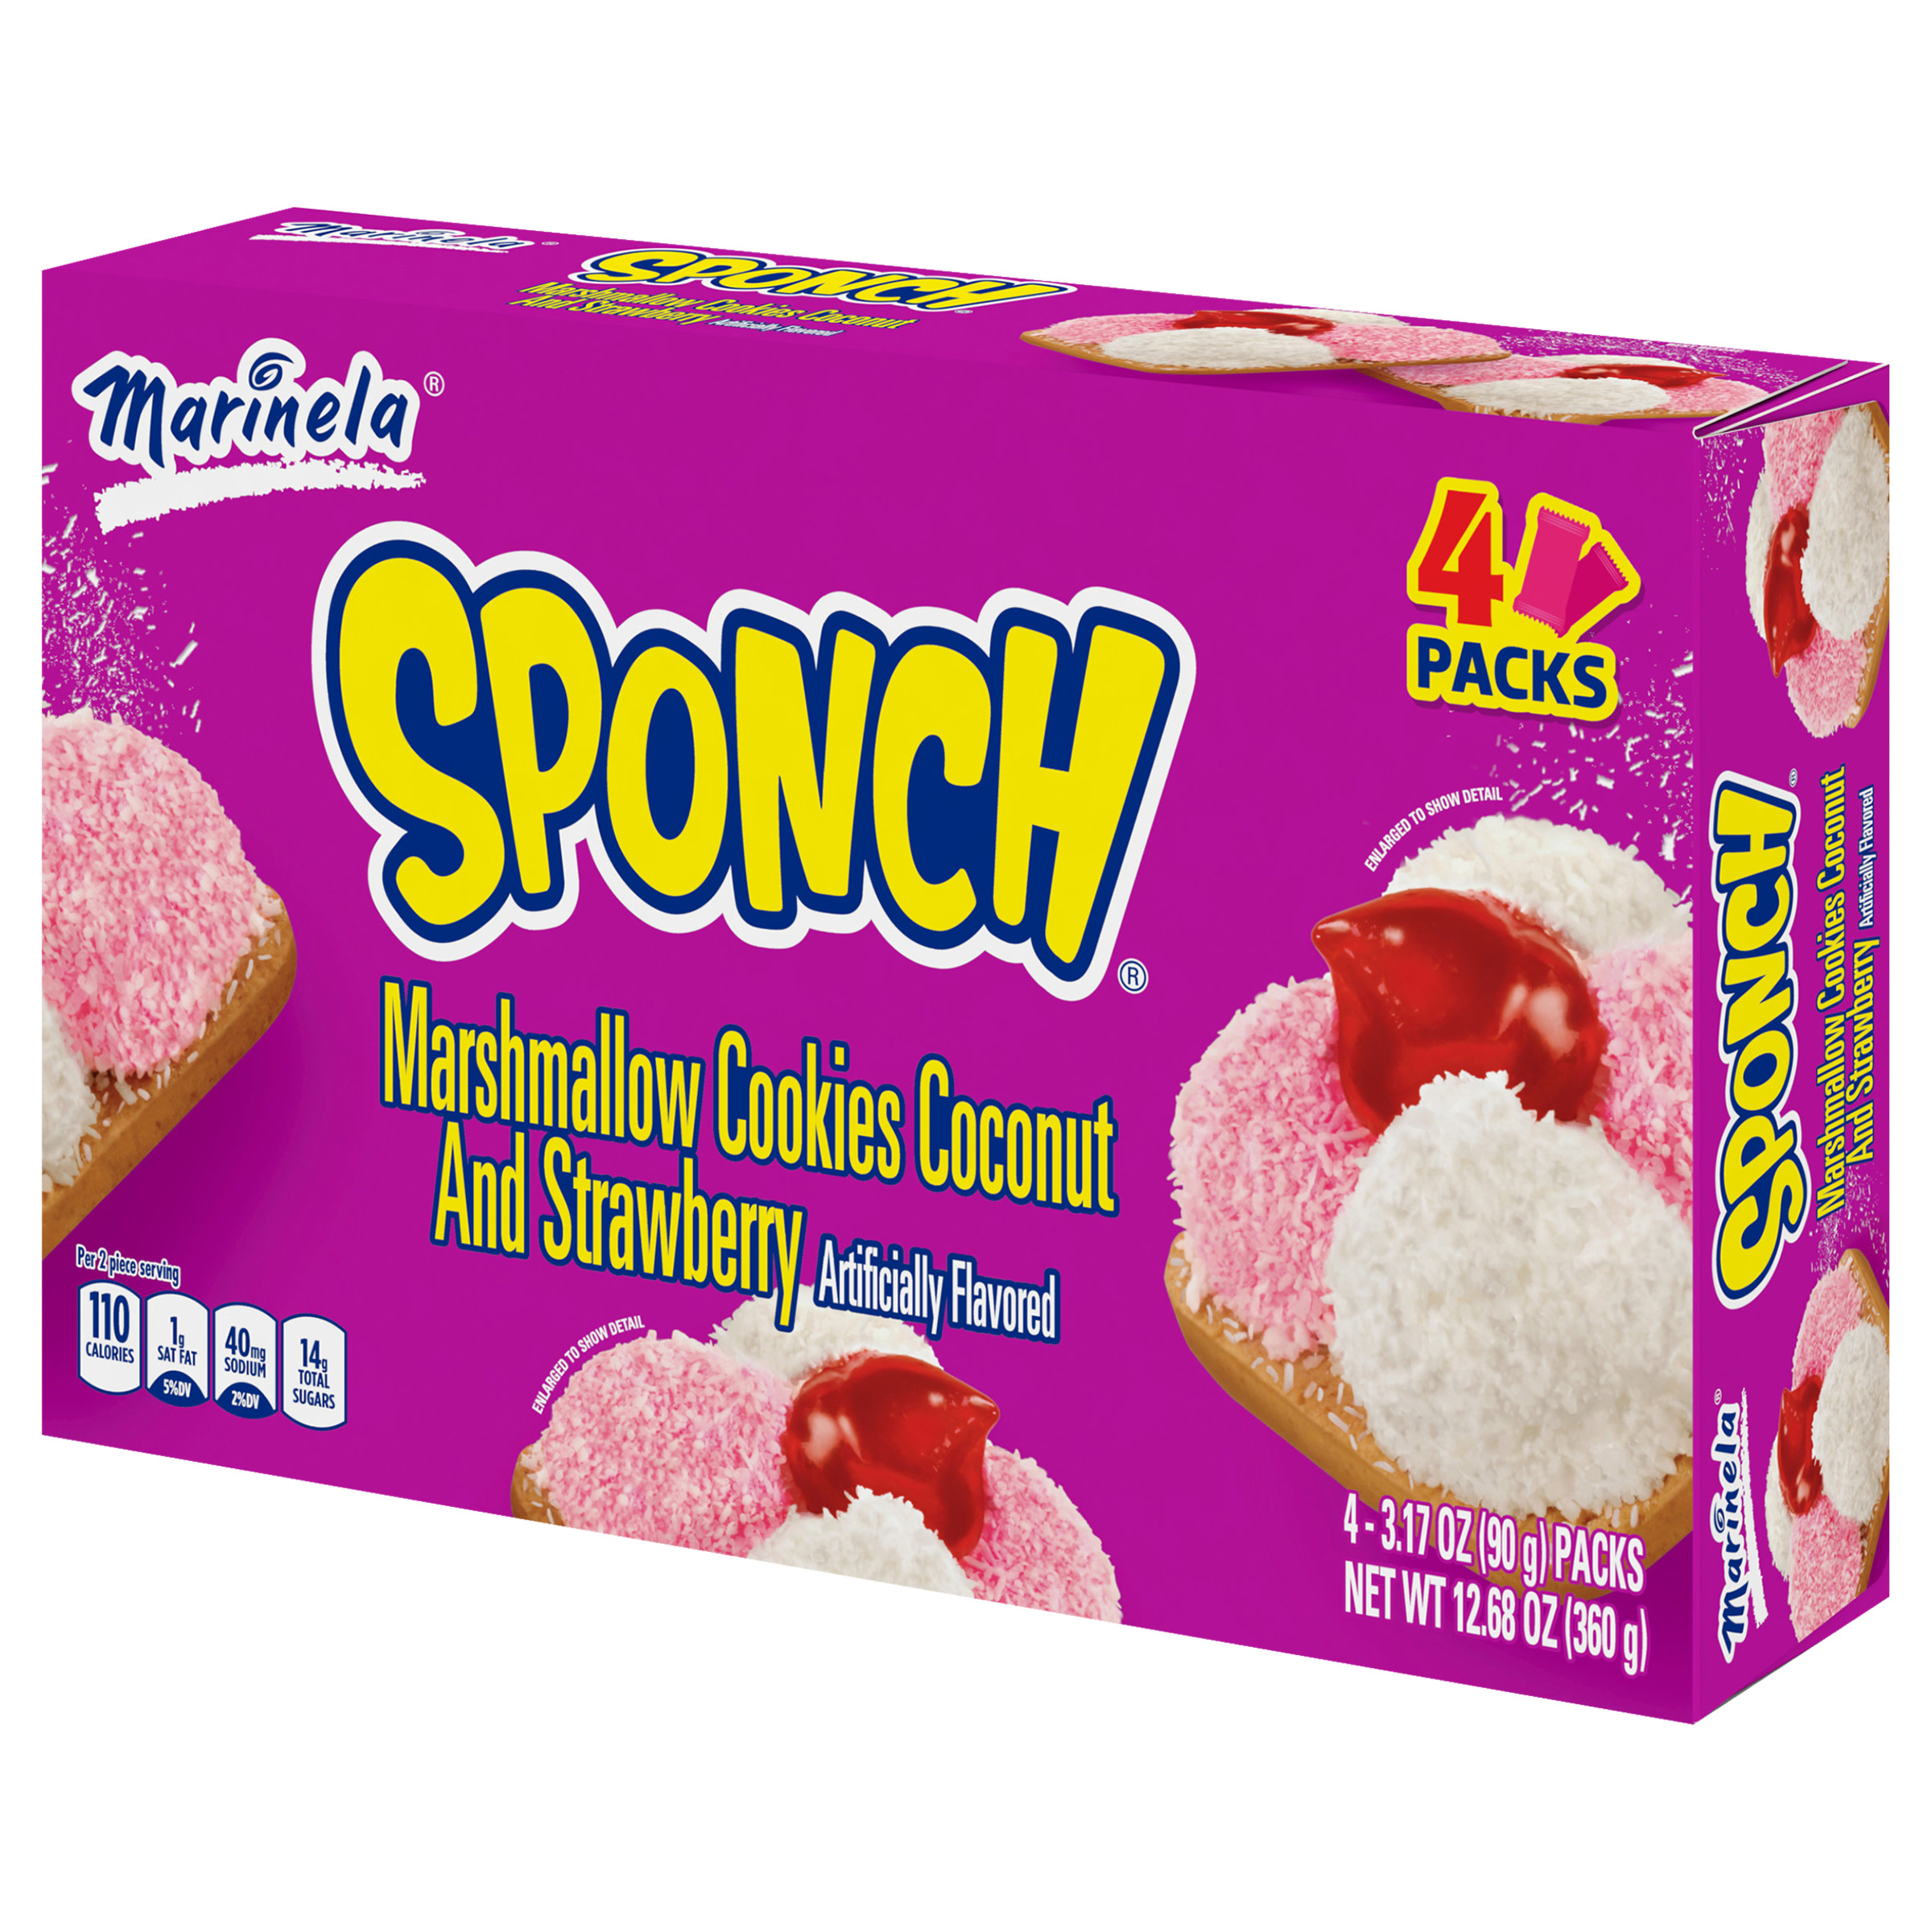 Marinela Sponch Marshmallow Cookies, 4 count, 12.68 oz - image 5 of 7